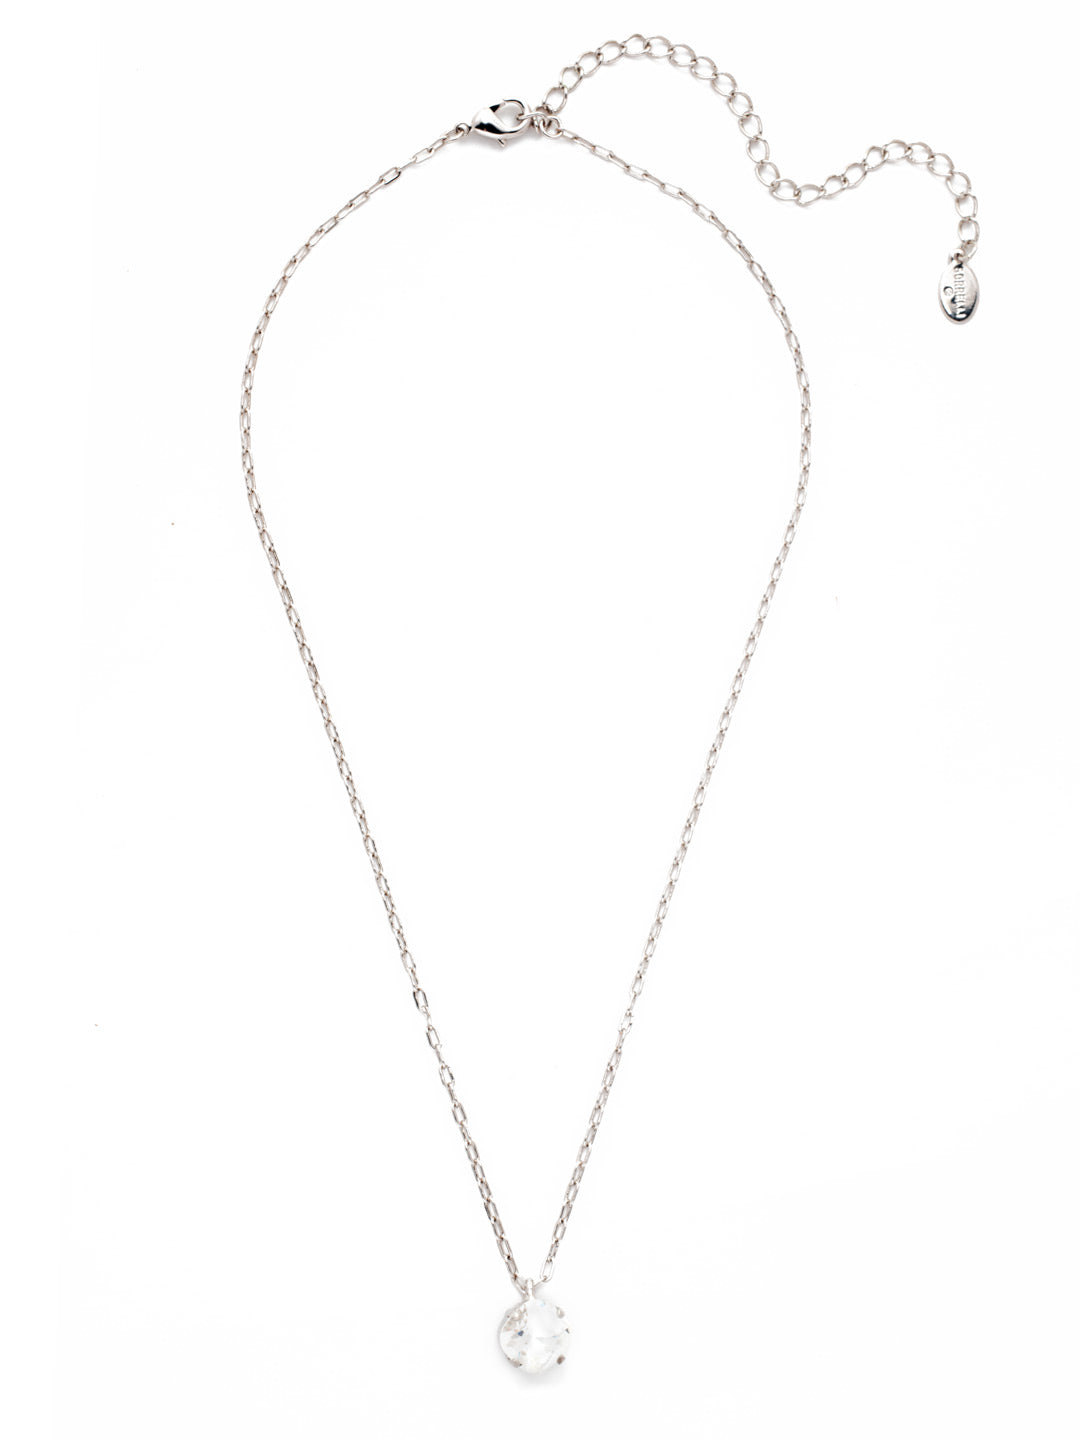 Siren Pendant Necklace - NEP22RHCRY - <p>With a cushion-cut crystal and delicate chain, the Siren Pendant  will add a litle sparkle to your everyday look. From Sorrelli's Crystal collection in our Palladium Silver-tone finish.</p>